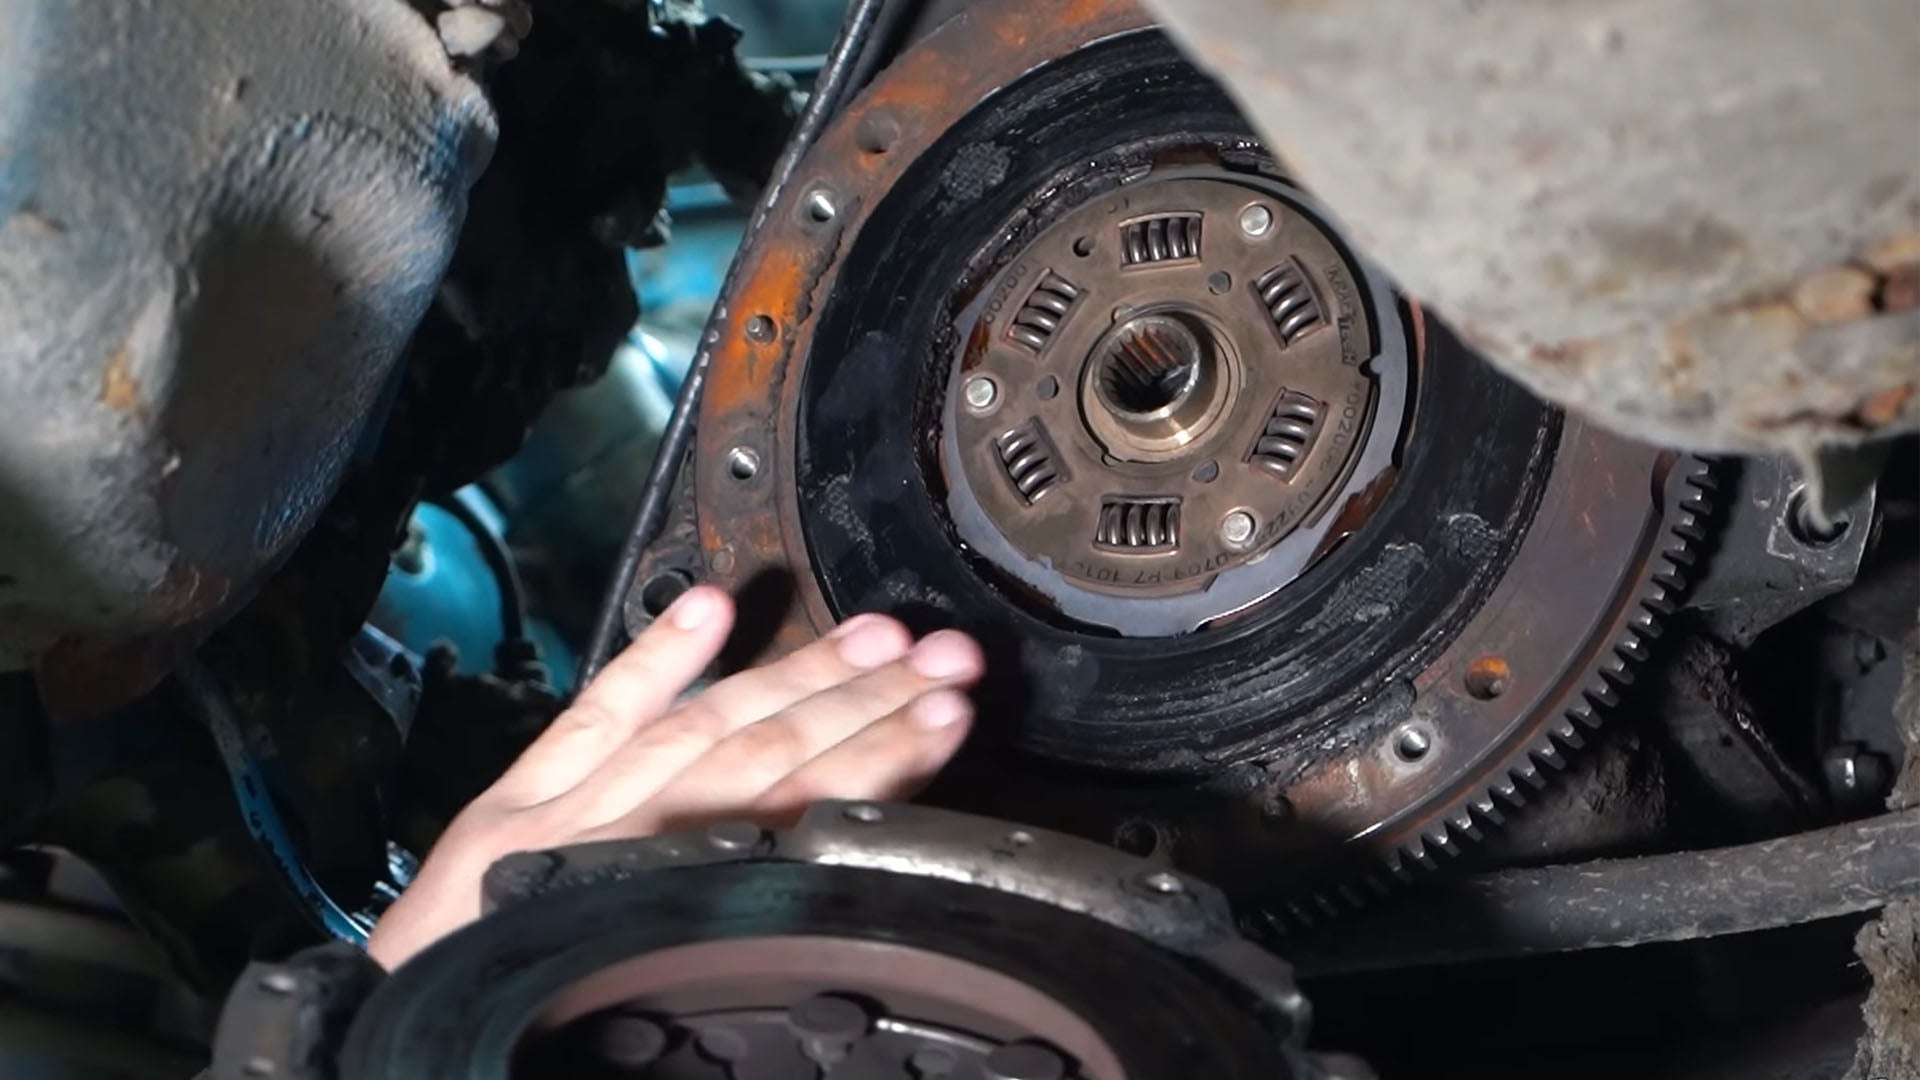 A Stick Shift Car With a Clutch Made of Rubber Is an Unpredictable Nightmare